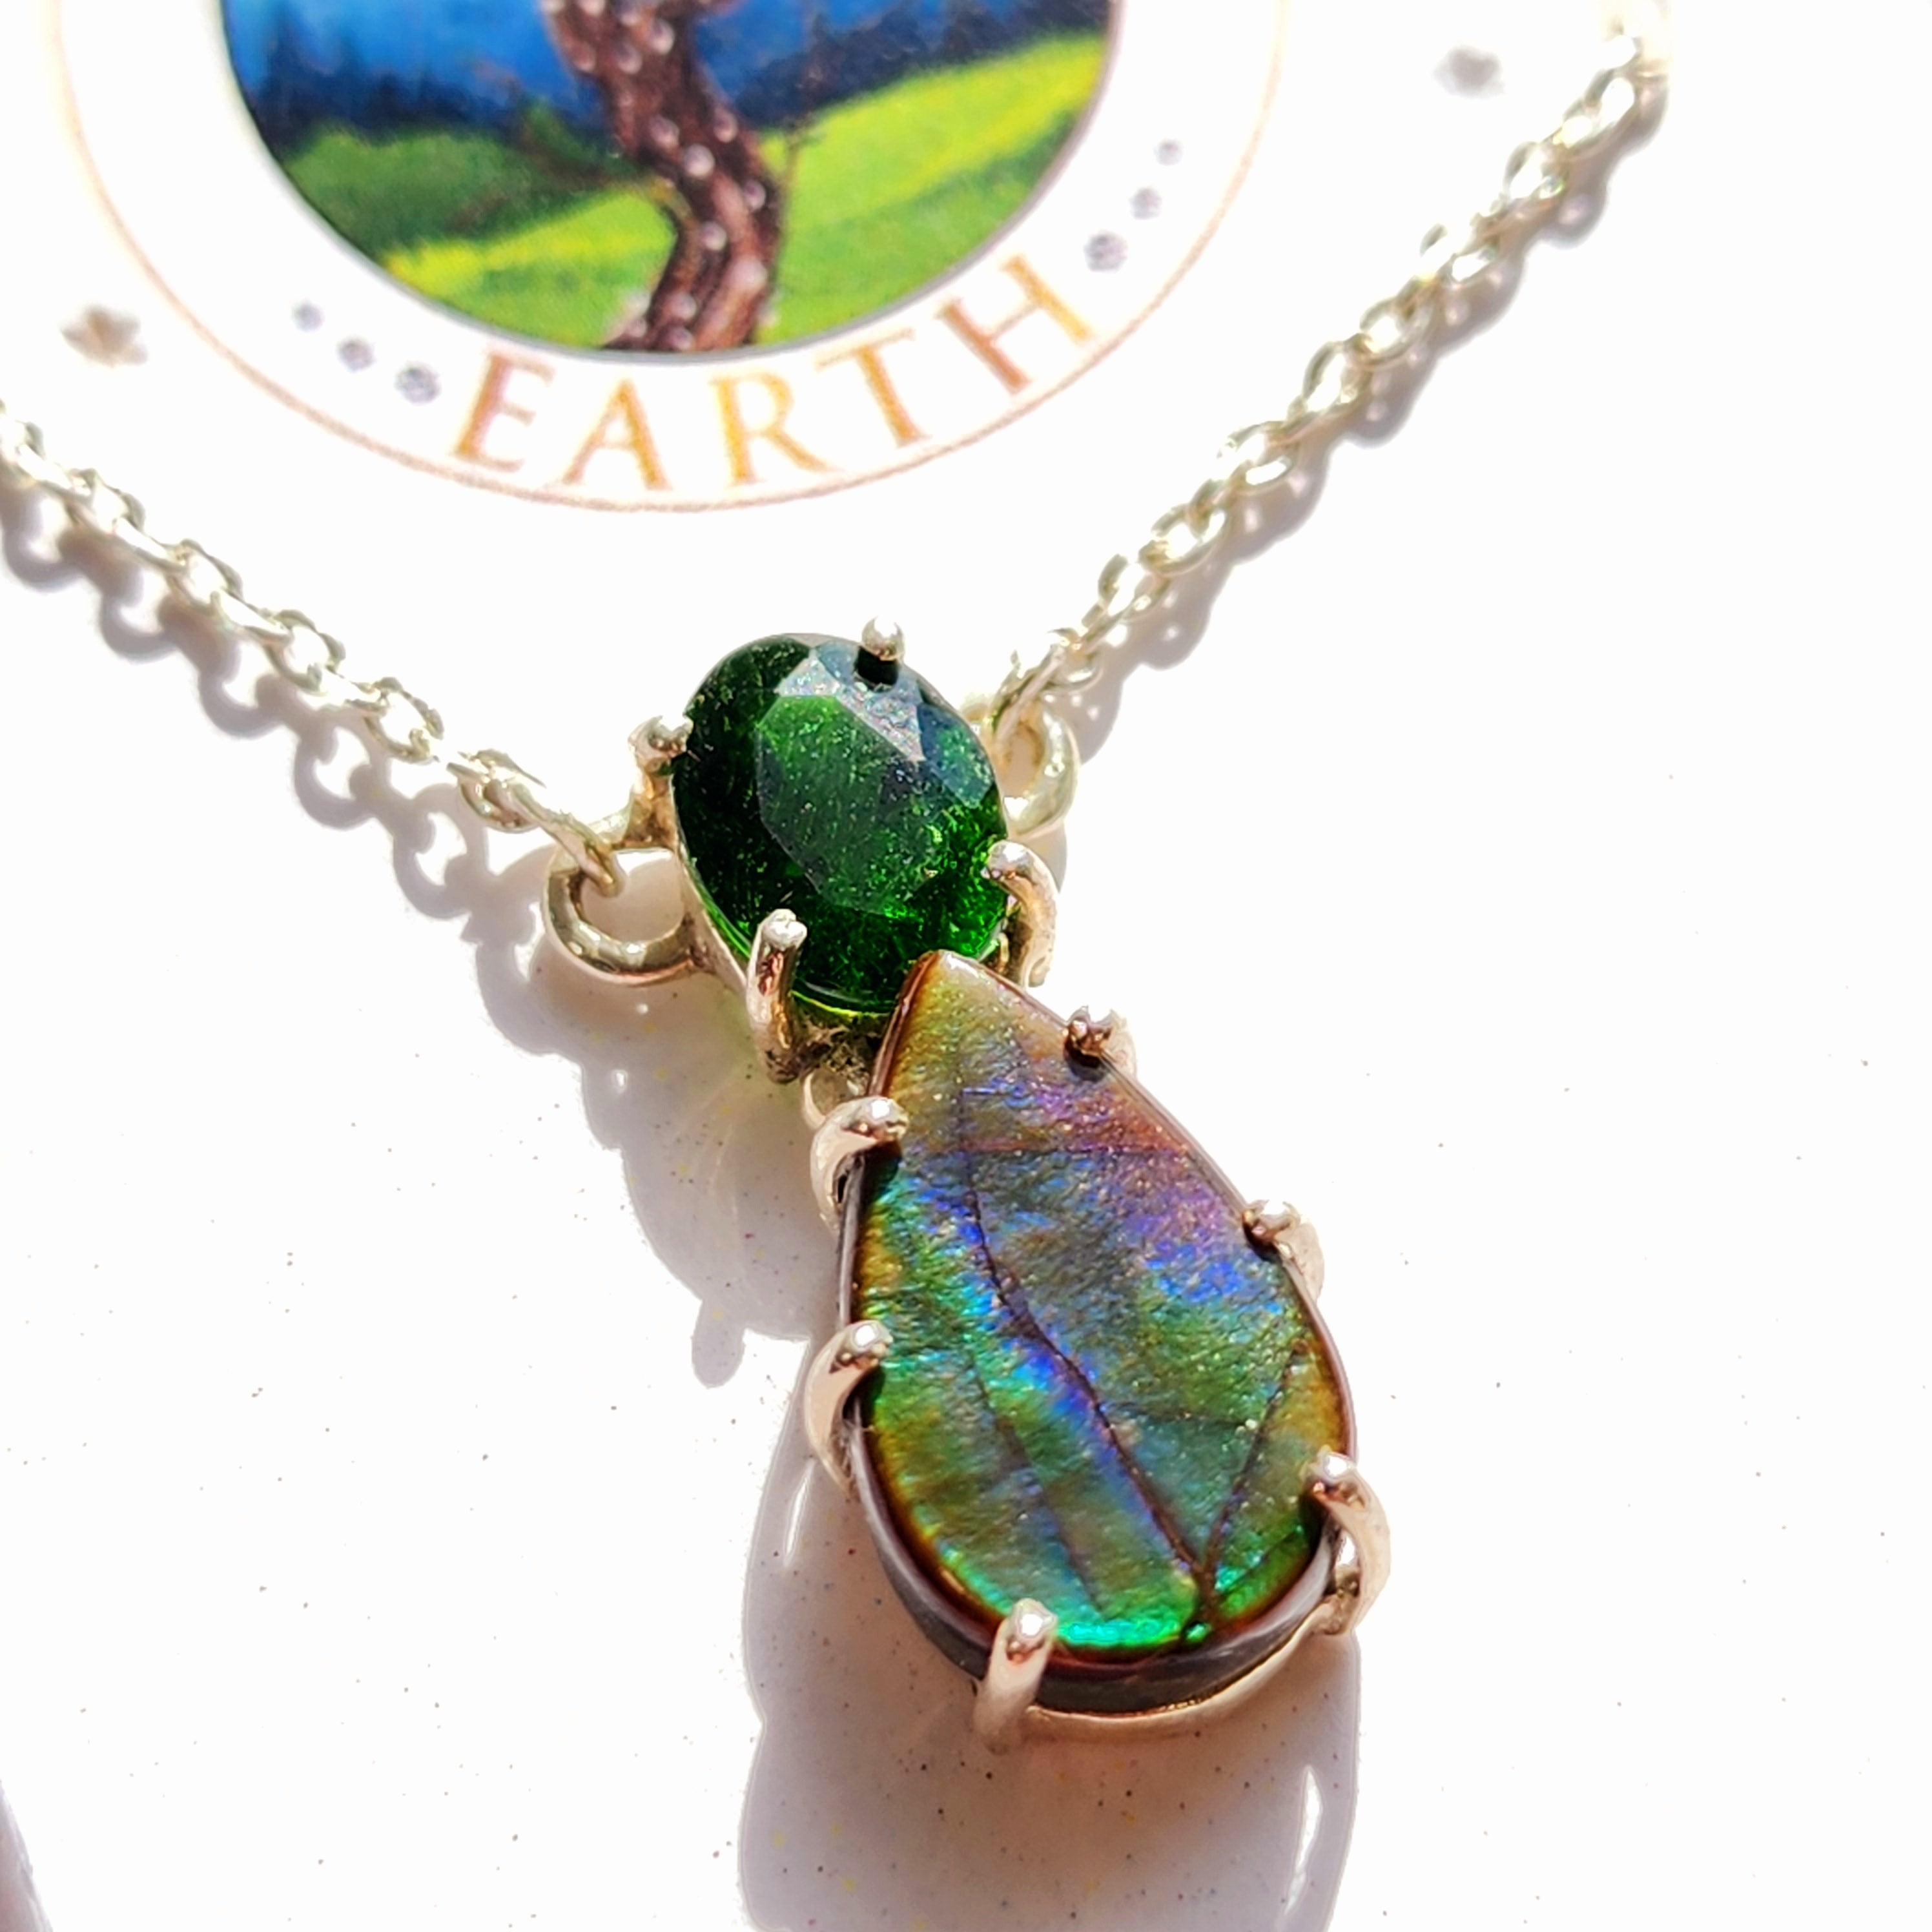 Ammolite x Green Tourmaline Necklace .925 Silver for Good Luck, Prosperity and Protection